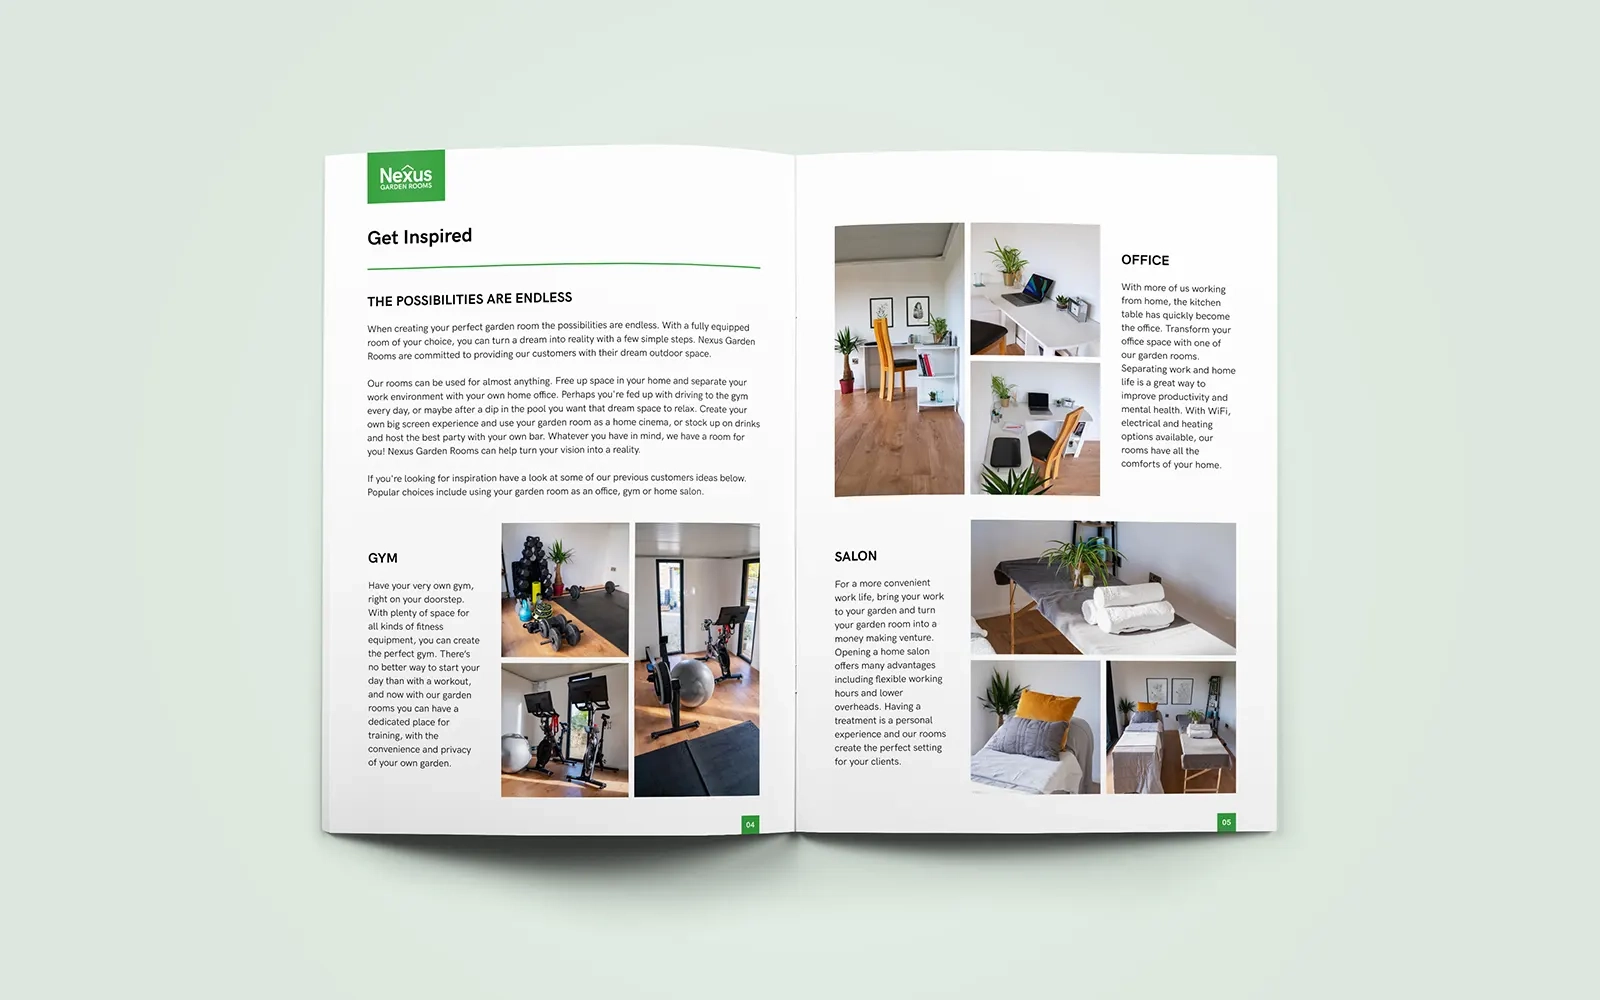  A two page spread of the brochure showing examples of different ways customers can use a garden room from a gym to an office or a home salon